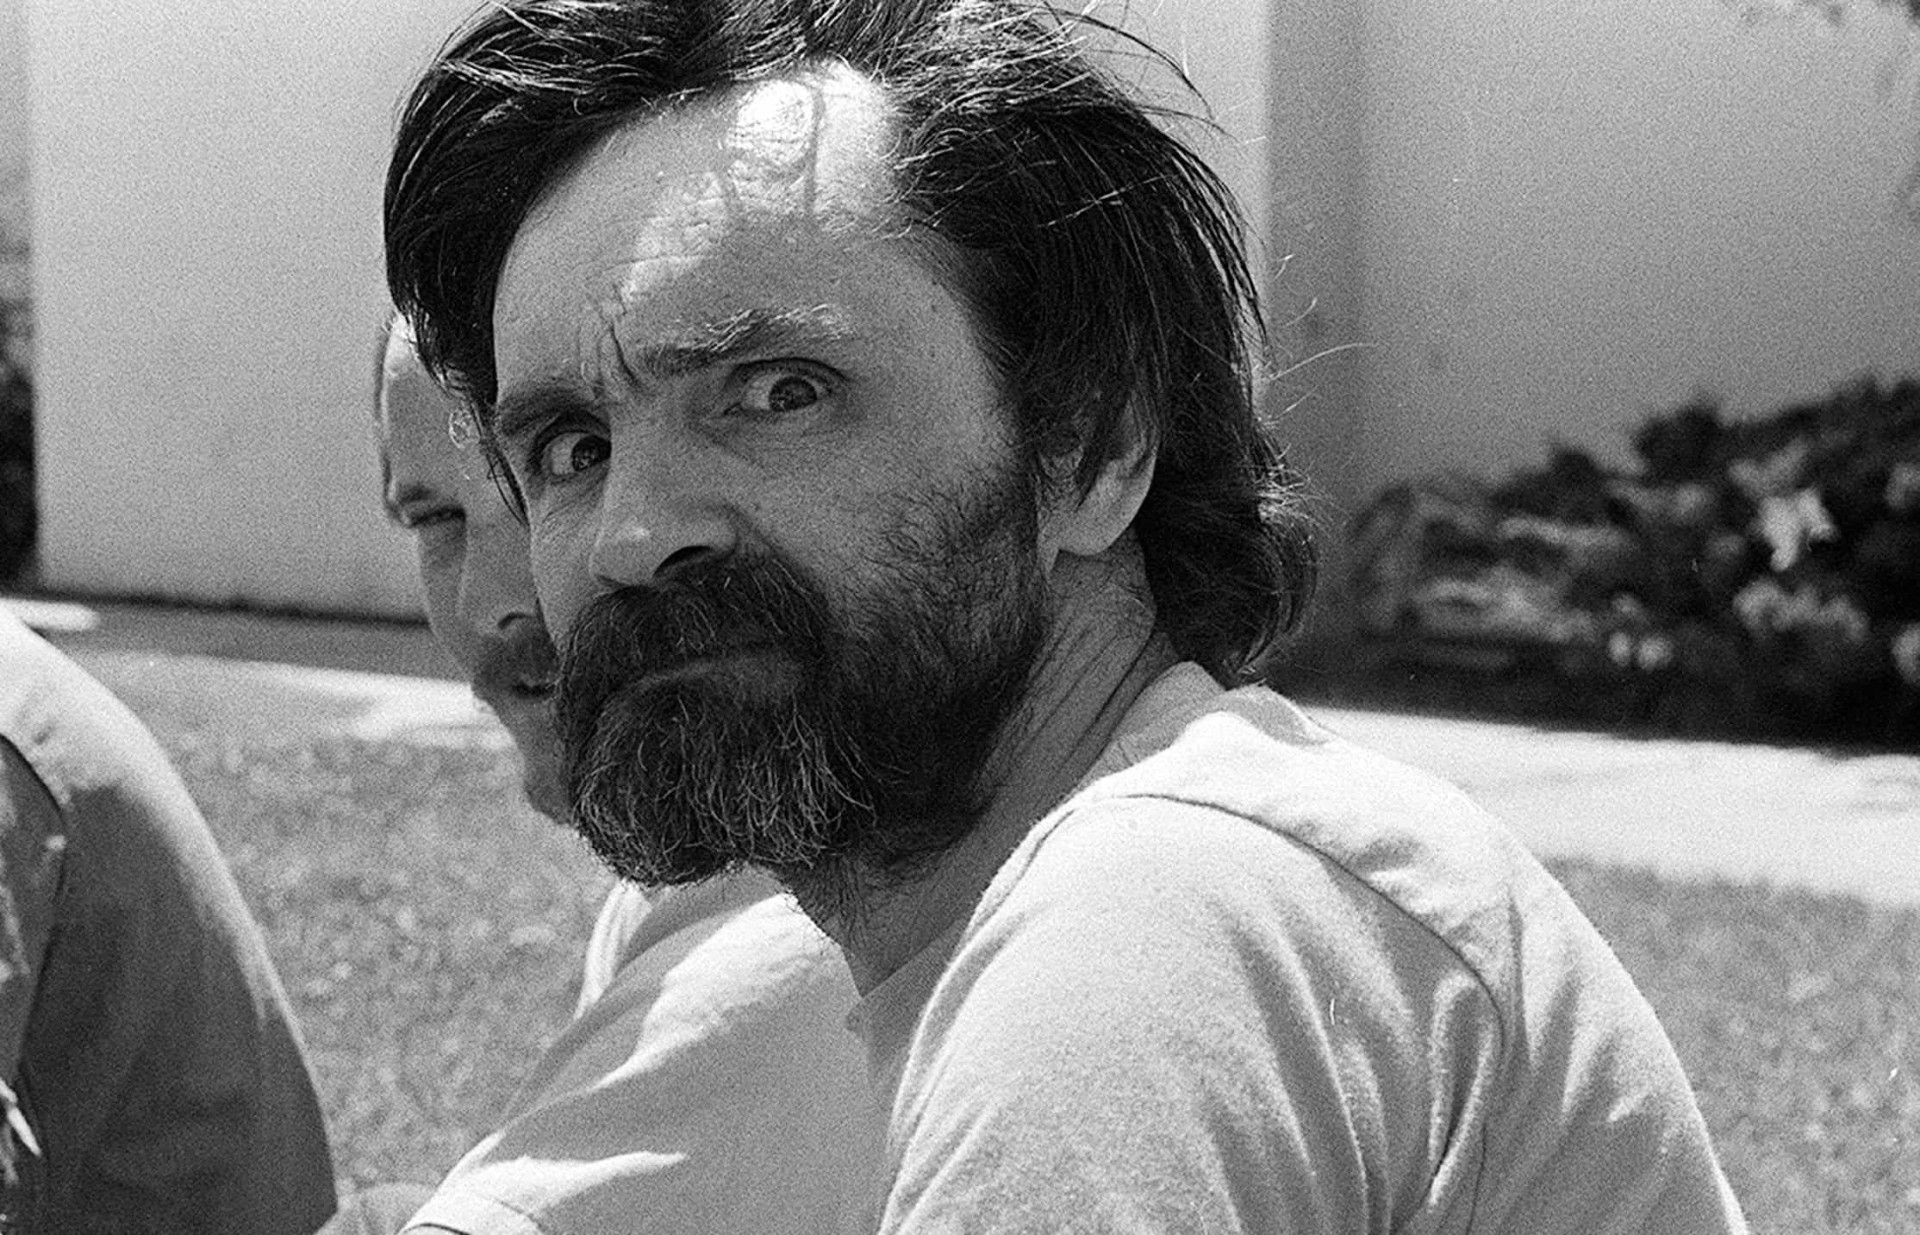 <p>The report contends that Manson started to make progress for the first time in his life thanks to the religion.</p><p><a href="https://www.msn.com/en-us/community/channel/vid-7xx8mnucu55yw63we9va2gwr7uihbxwc68fxqp25x6tg4ftibpra?cvid=94631541bc0f4f89bfd59158d696ad7e">Follow us and access great exclusive content every day</a></p>